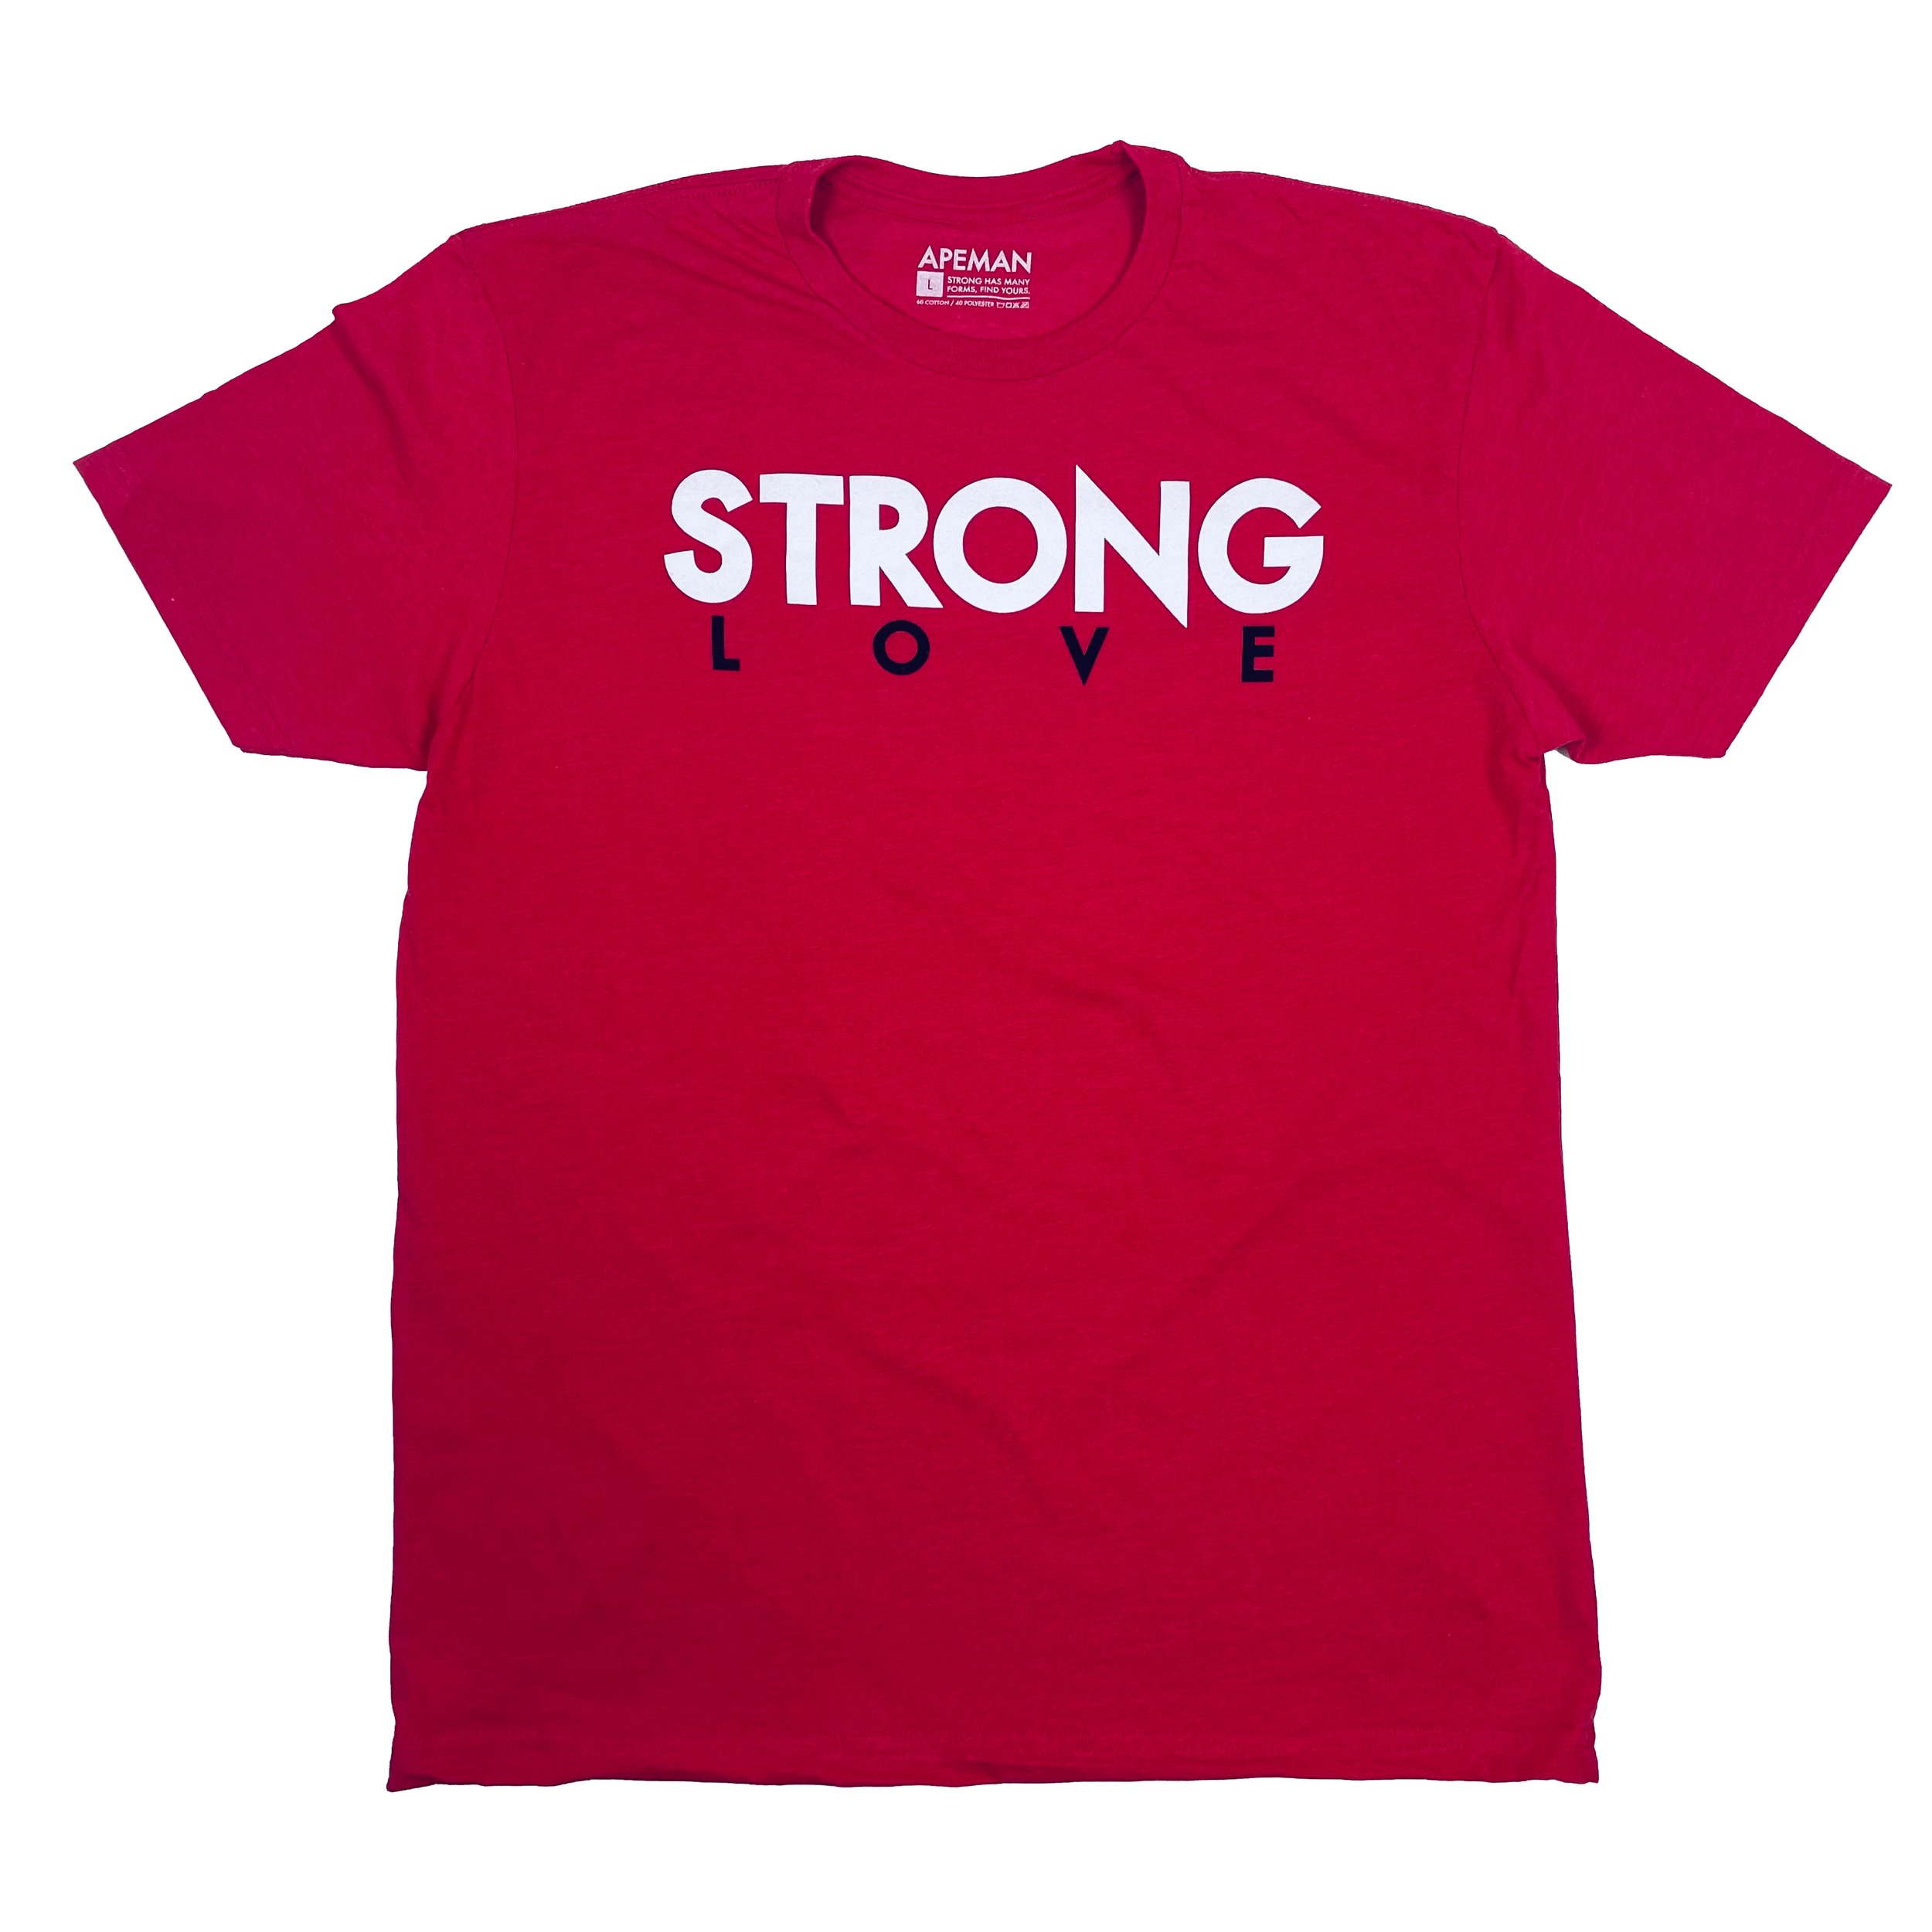 APEMAN STRONG Men's Workout Shirt - Athletic Tee Sold by Apeman Strong